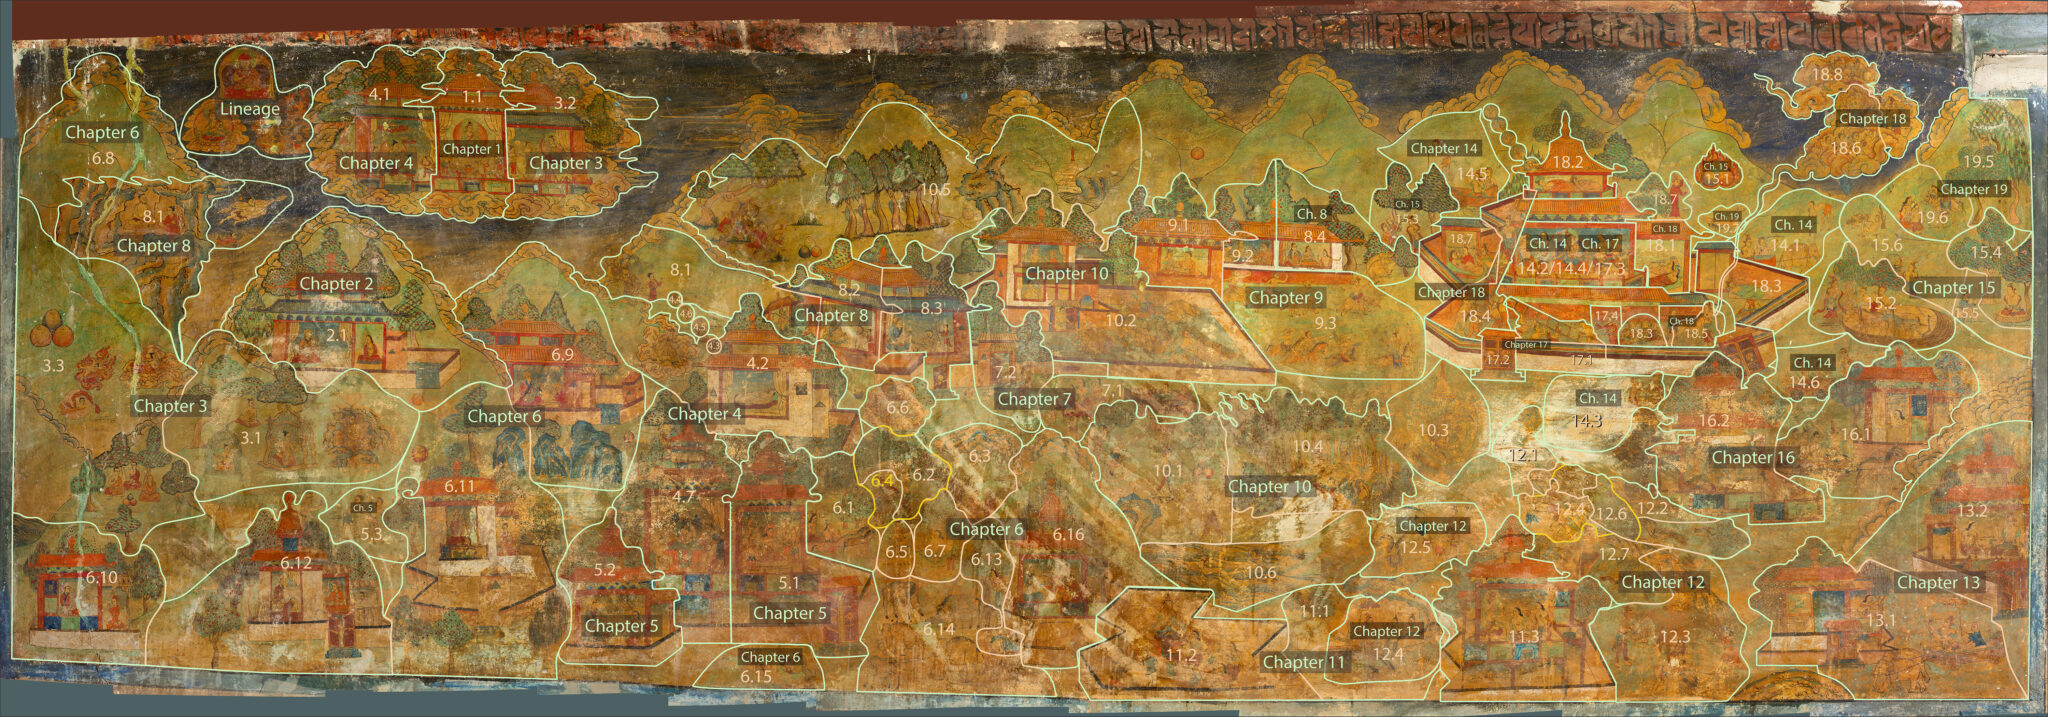 Text boxes and faint lines describe and delineate component parts of mural depicting mountain landscape